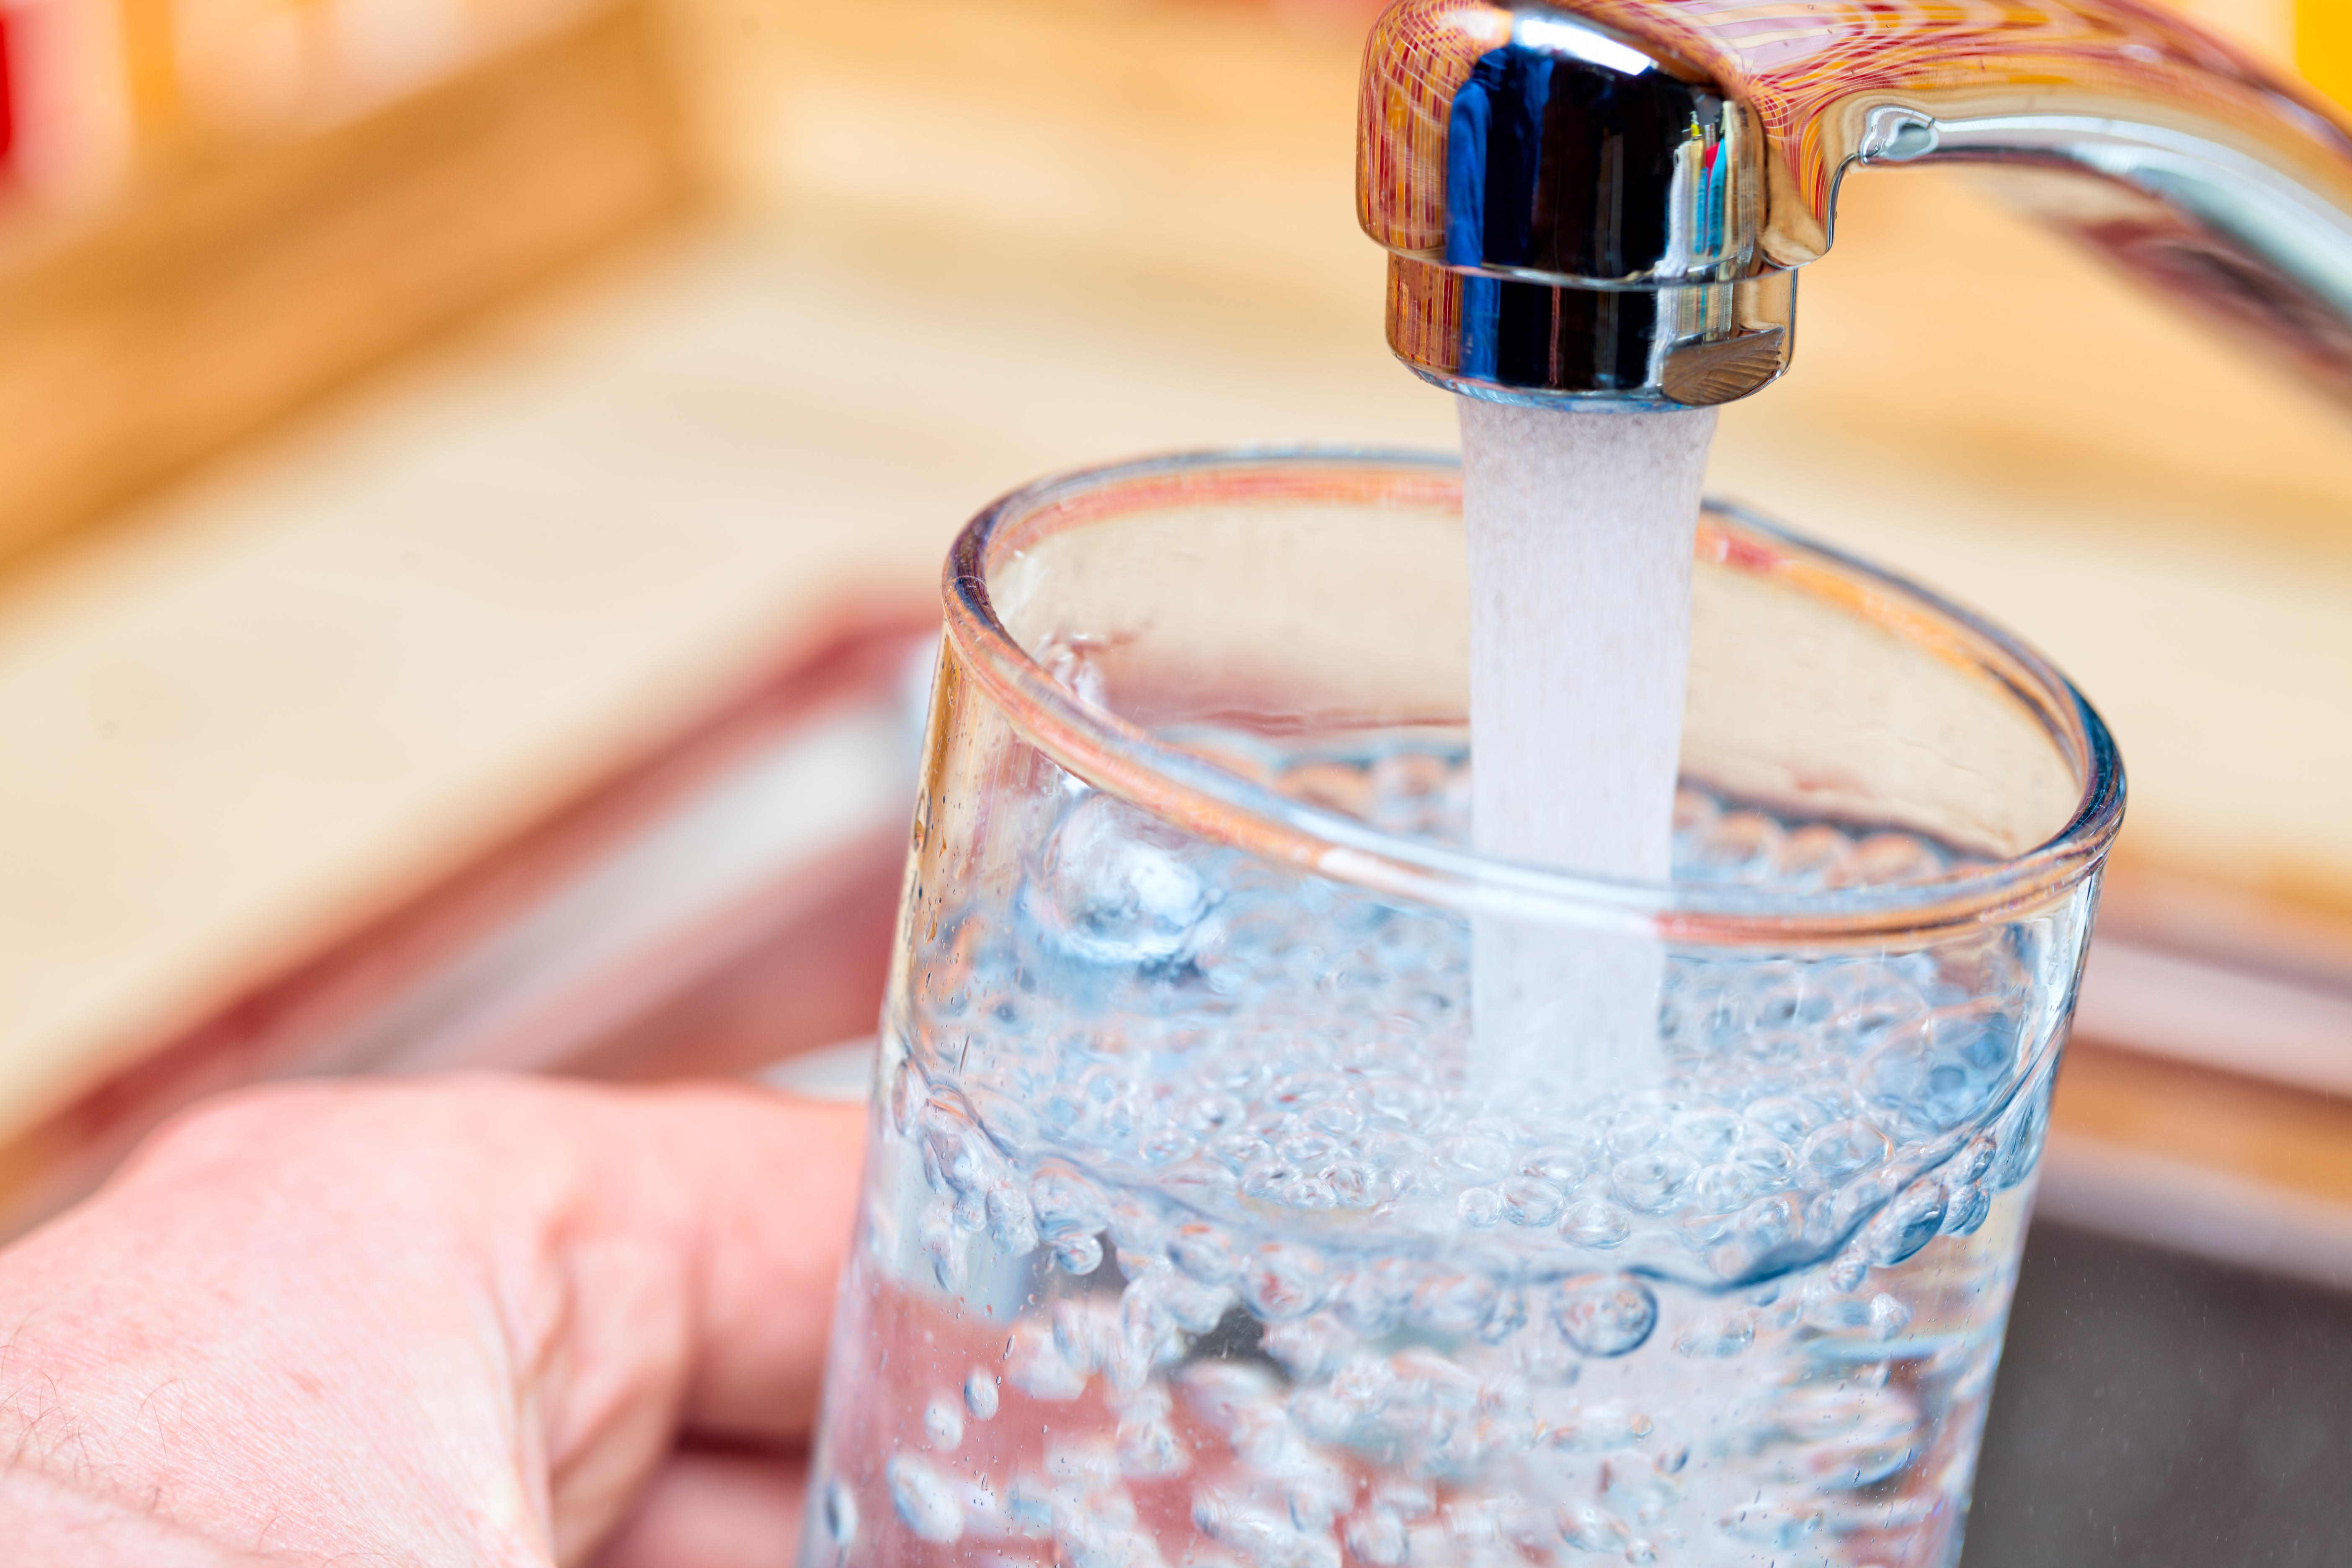 Are you drinking enough water? The importance of staying hydrated as